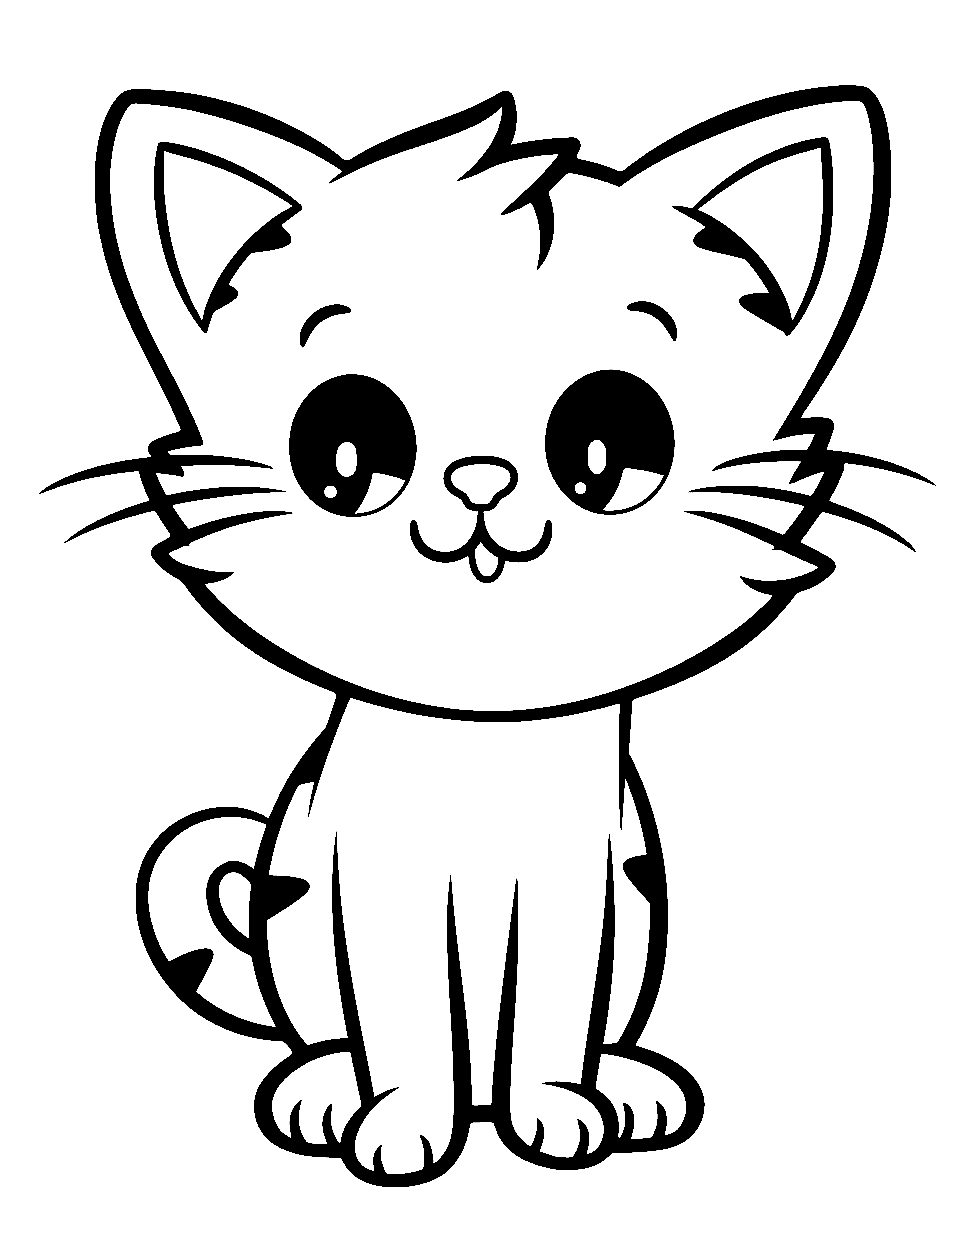 Simple Kitty Smile Kitten Coloring Page - A smiling kitten, perfect for young kids to color.